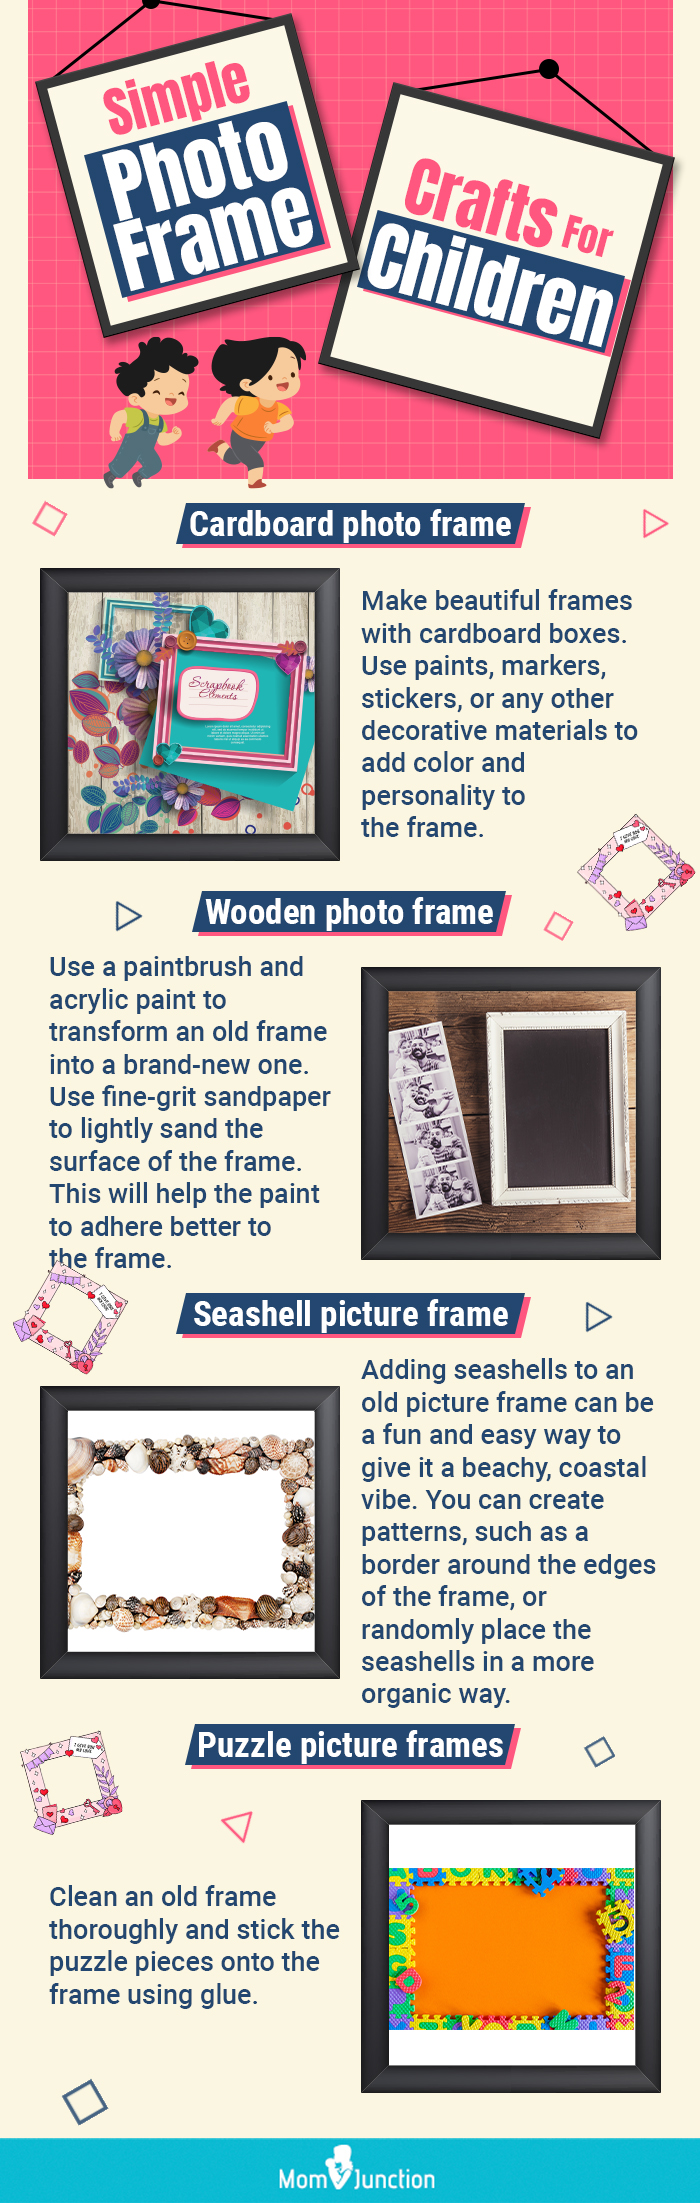 simple photo frame crafts for children (infographic)